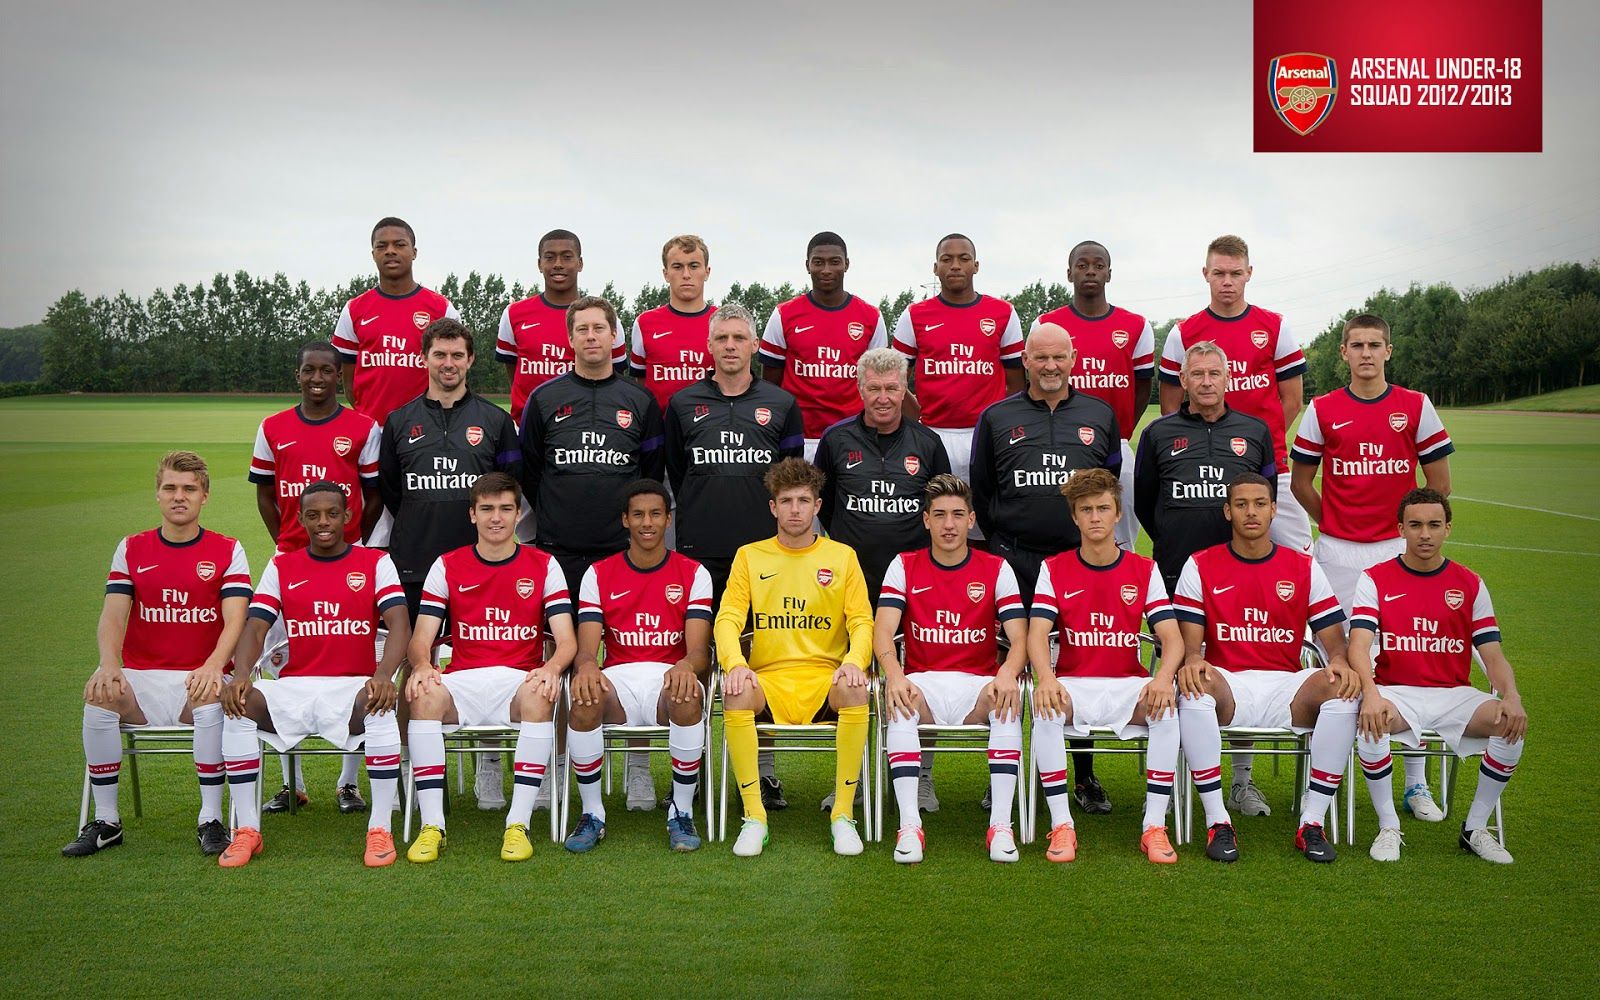 Firs Team Arsenal Free wallpaper HD, background, Free Download Image, Gallery Photo and Picture